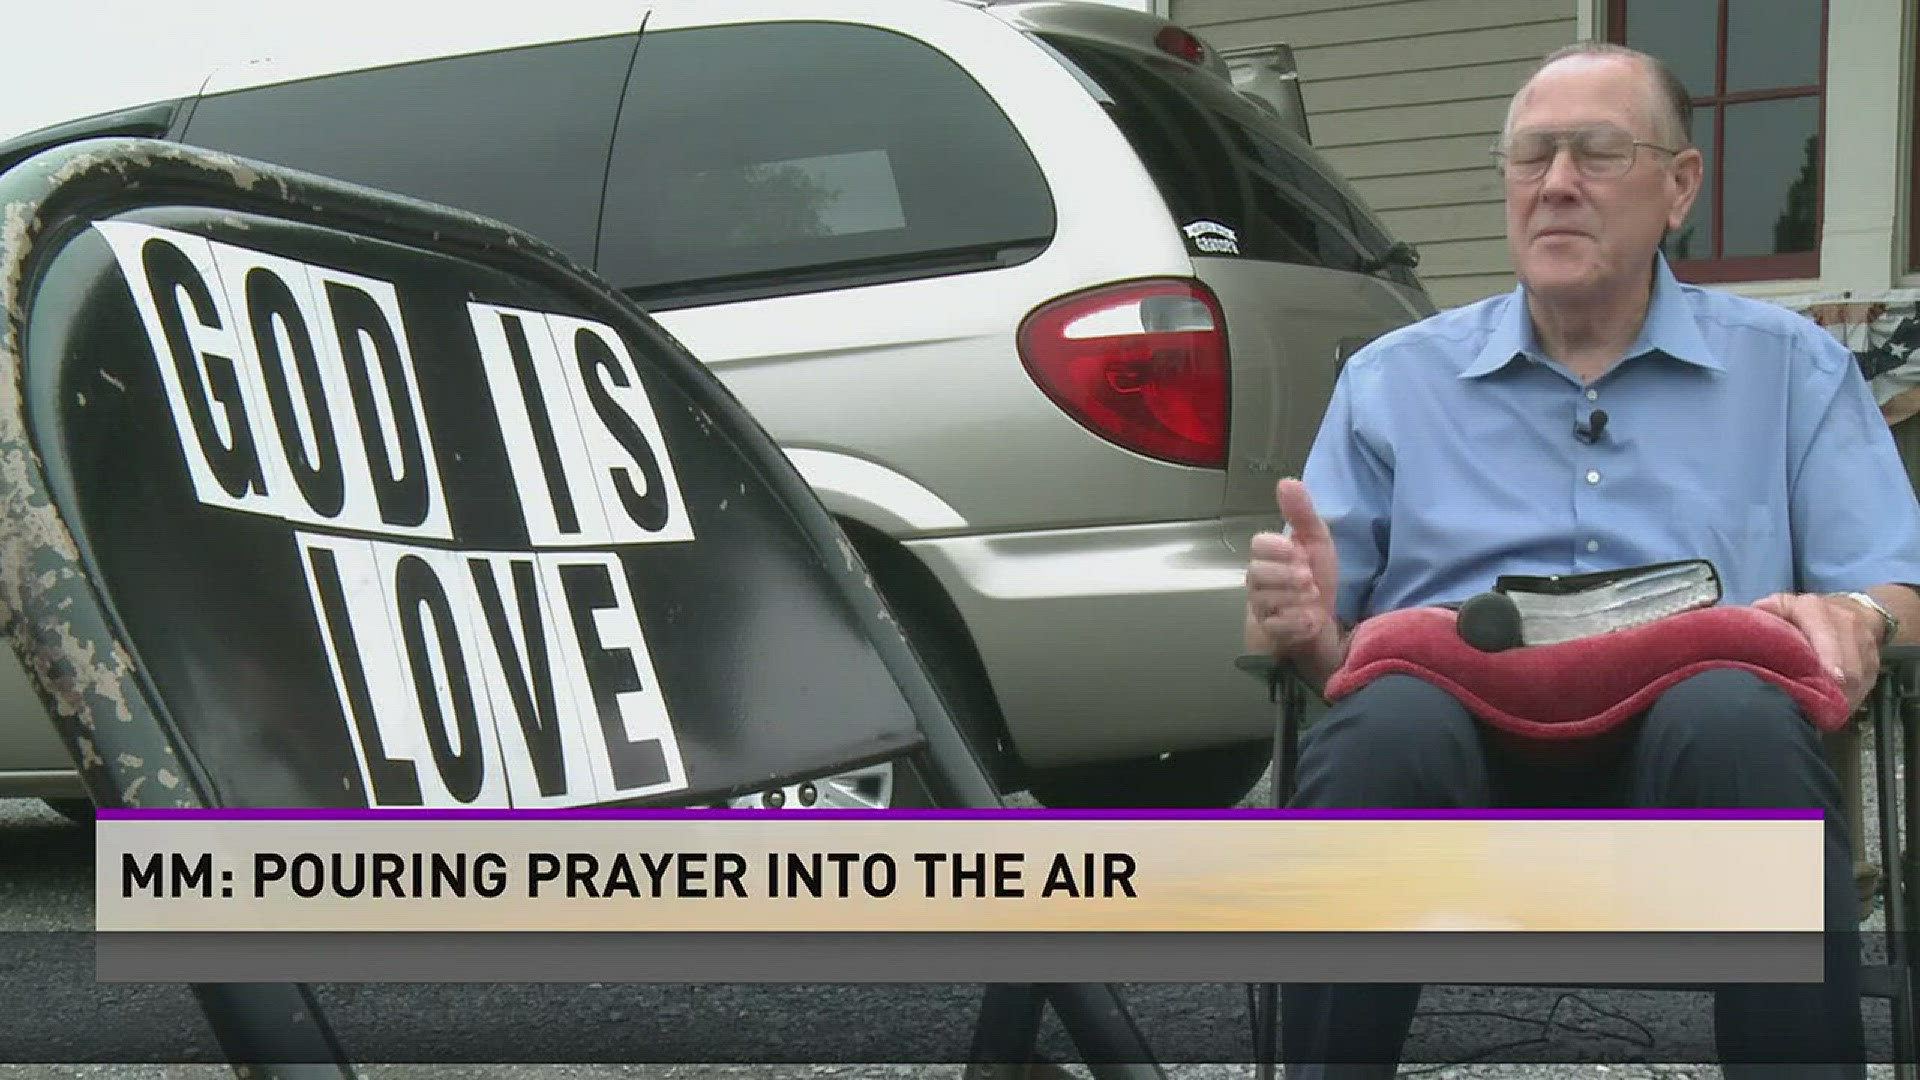 One man is on a mission to spread prayer through his community.